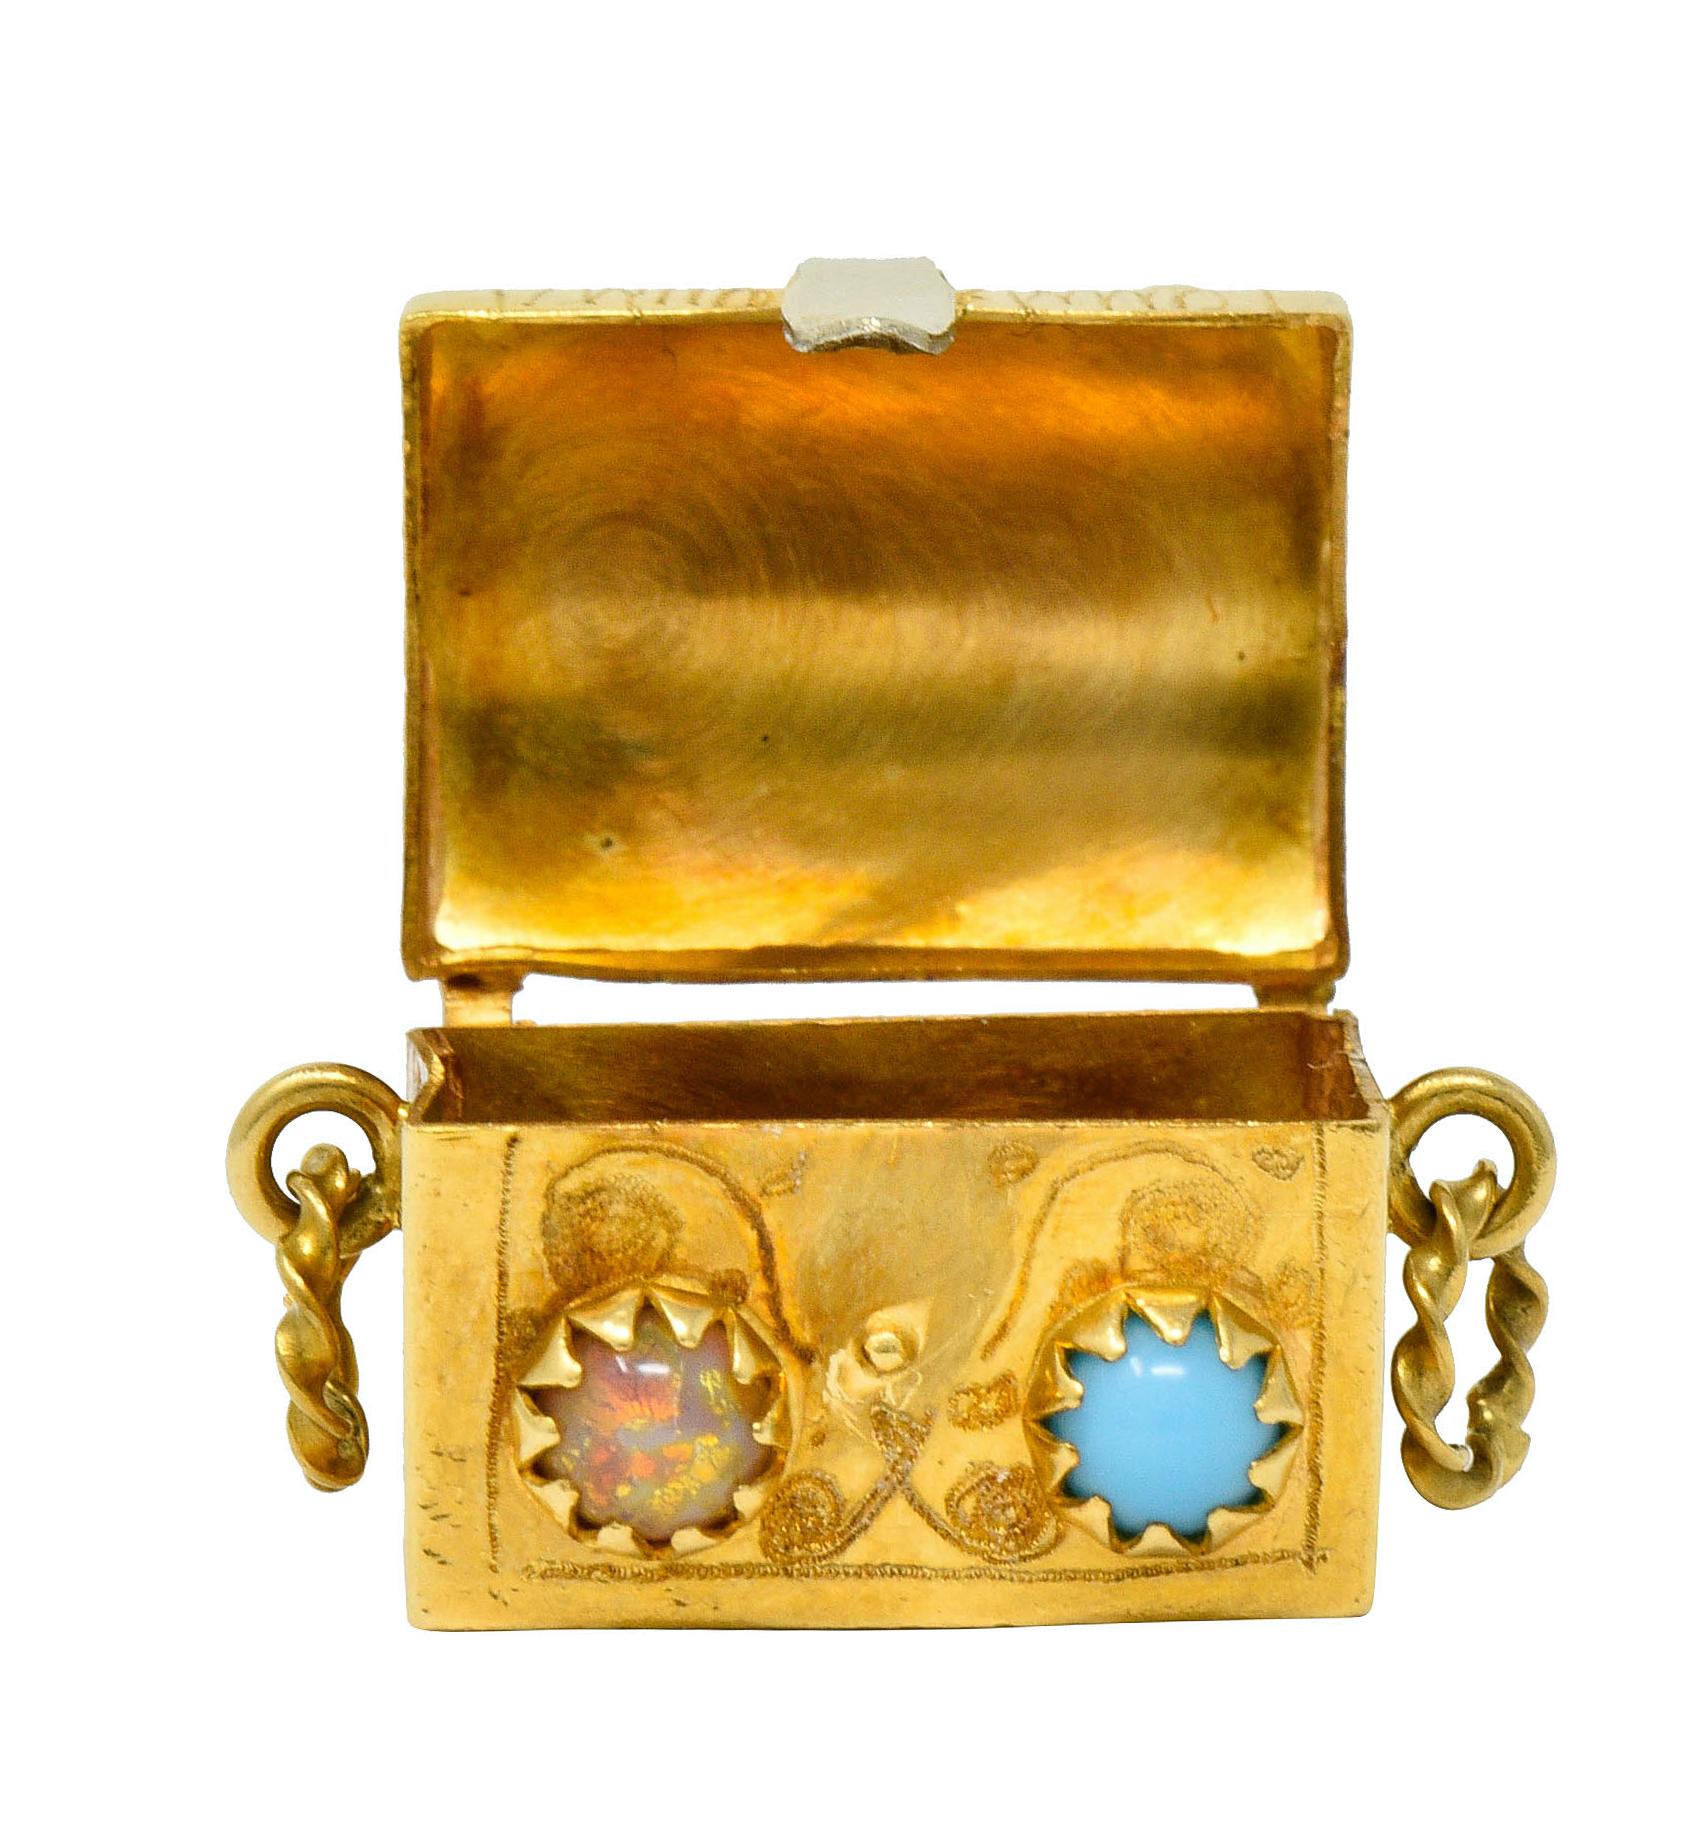 Treasure chest charm is designed as a rectangular form

That opens on a hinge to reveal a box-like cavity

Chest is accented by round glass cabochons; turquoise and opal inspired

With twisted rope articulated handles, a polished white gold clasp,